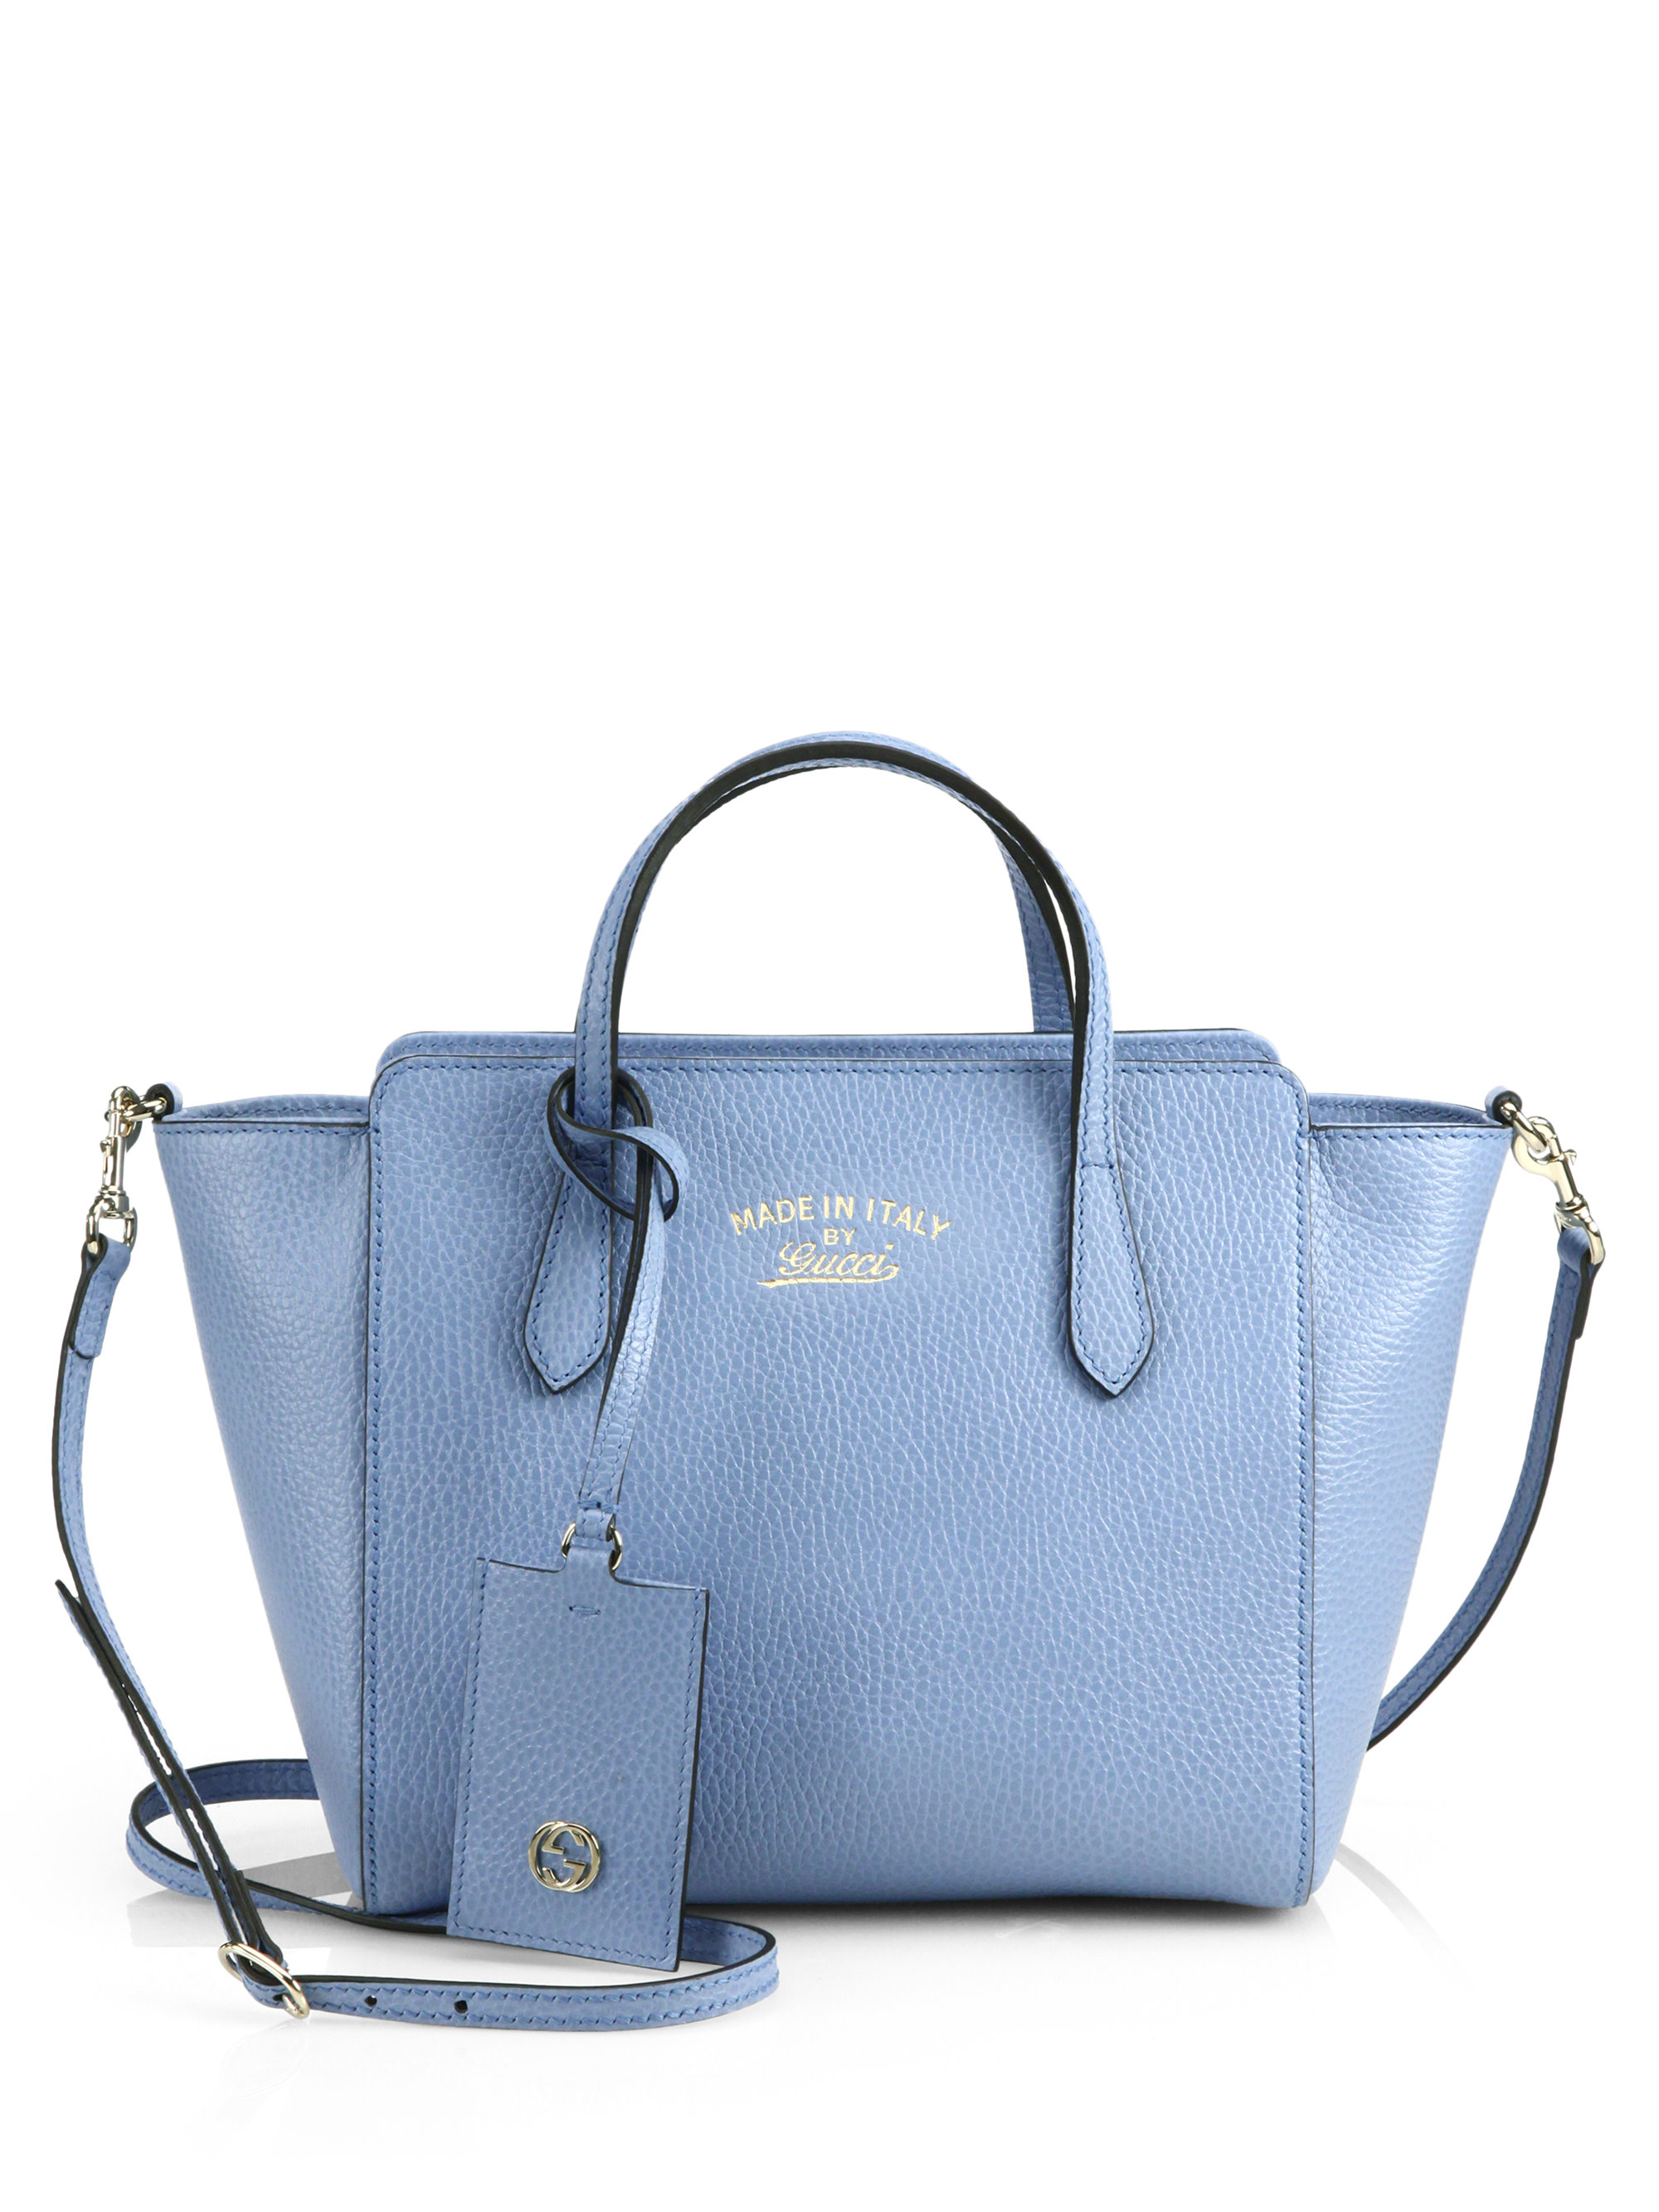 Gucci Swing Small Crossbody Bag in Blue (MINERAL BLUE) | Lyst